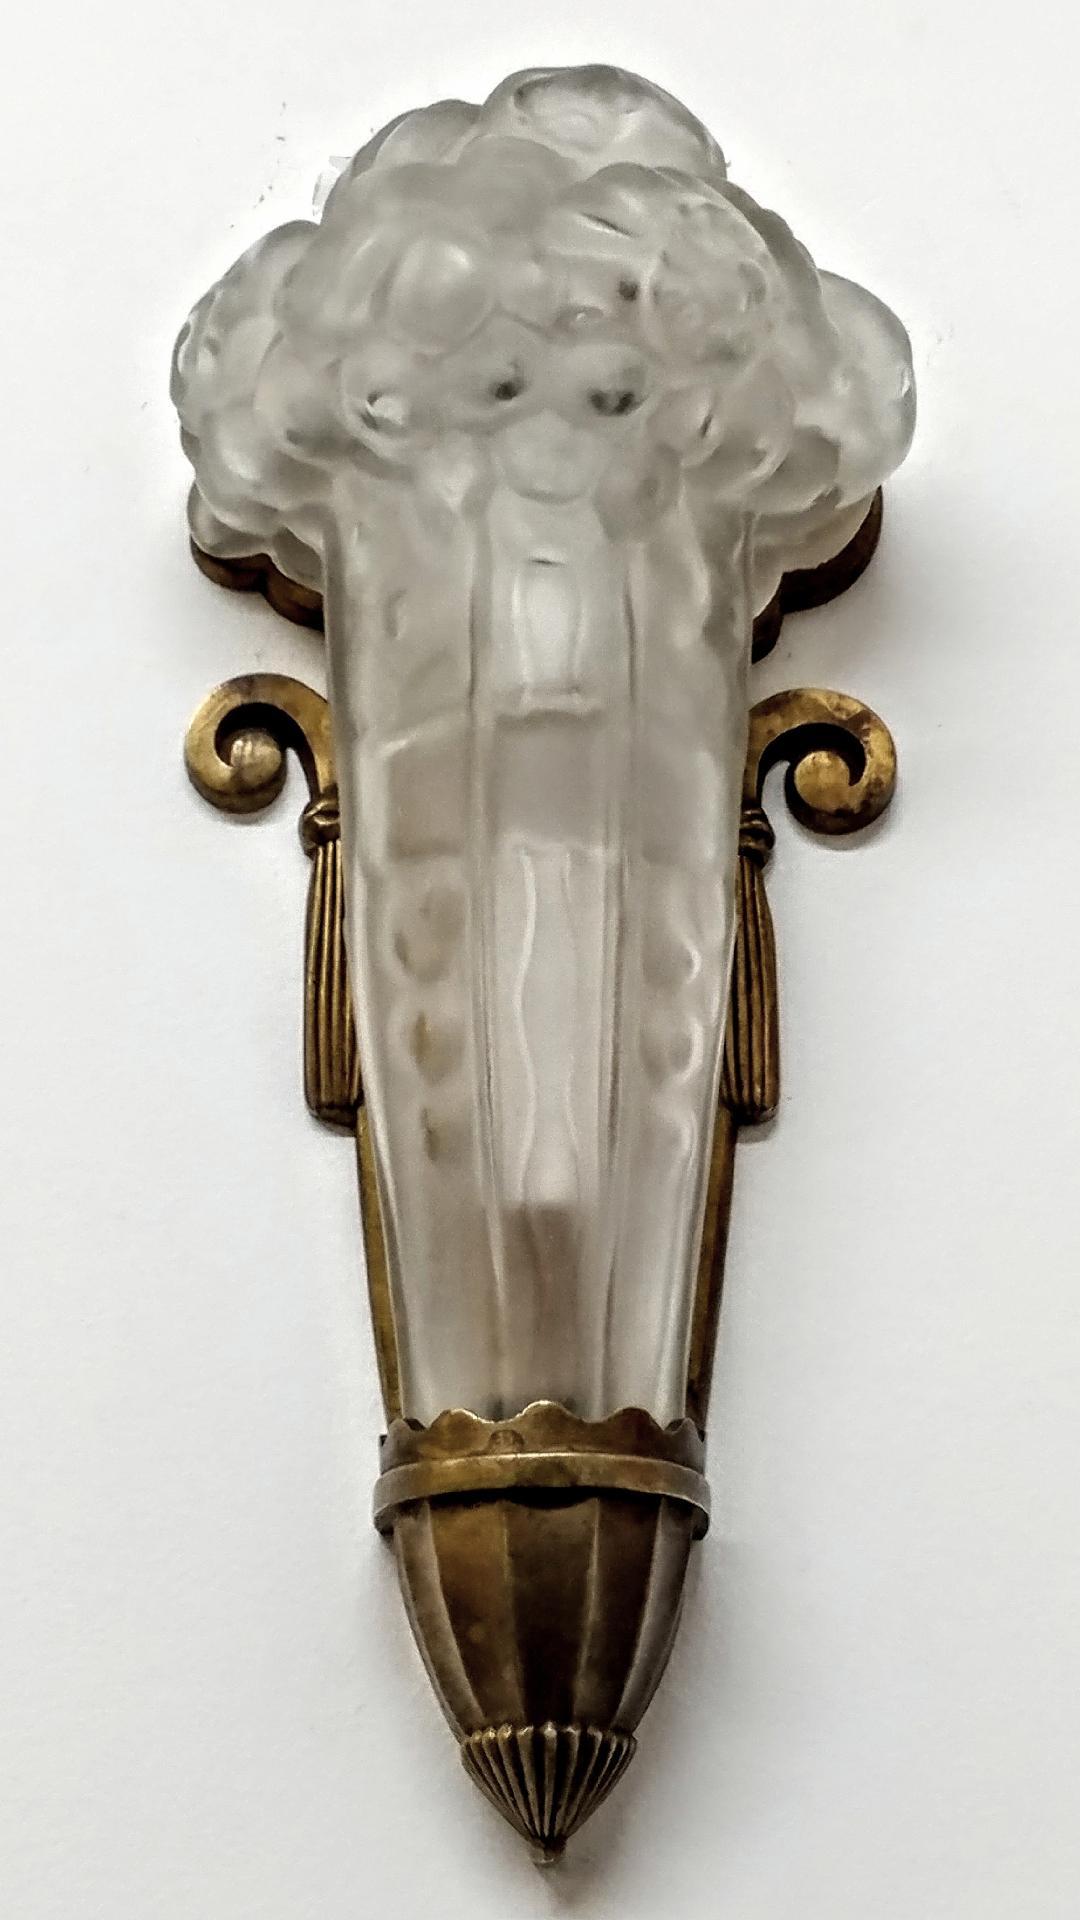 A French Art Deco wall sconce by the French artists 